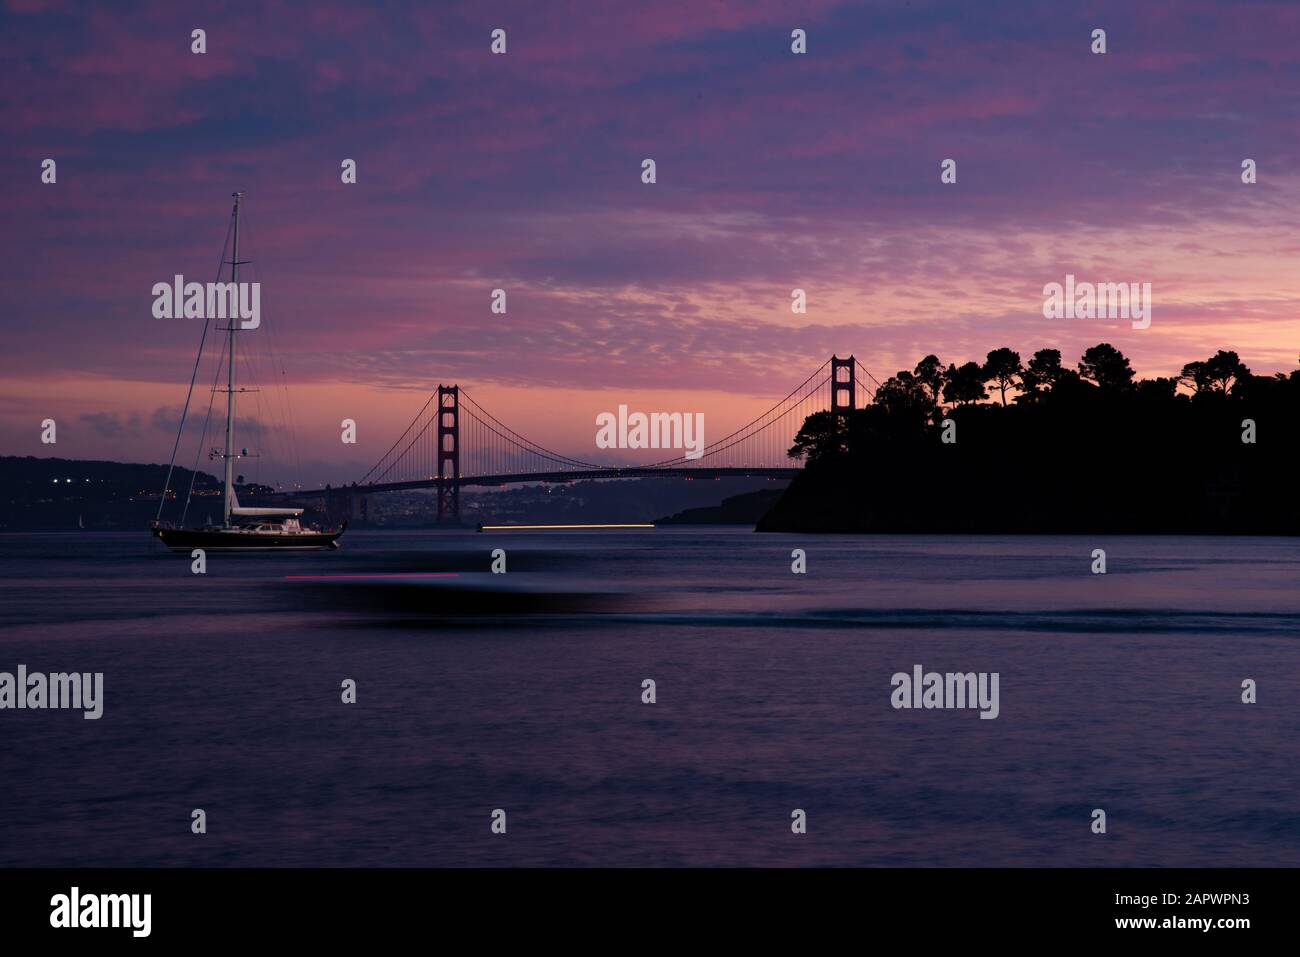 Shot of a Golden Gate Bridge Tiburon USA in the purple sky with a boat floating in the water Stock Photo